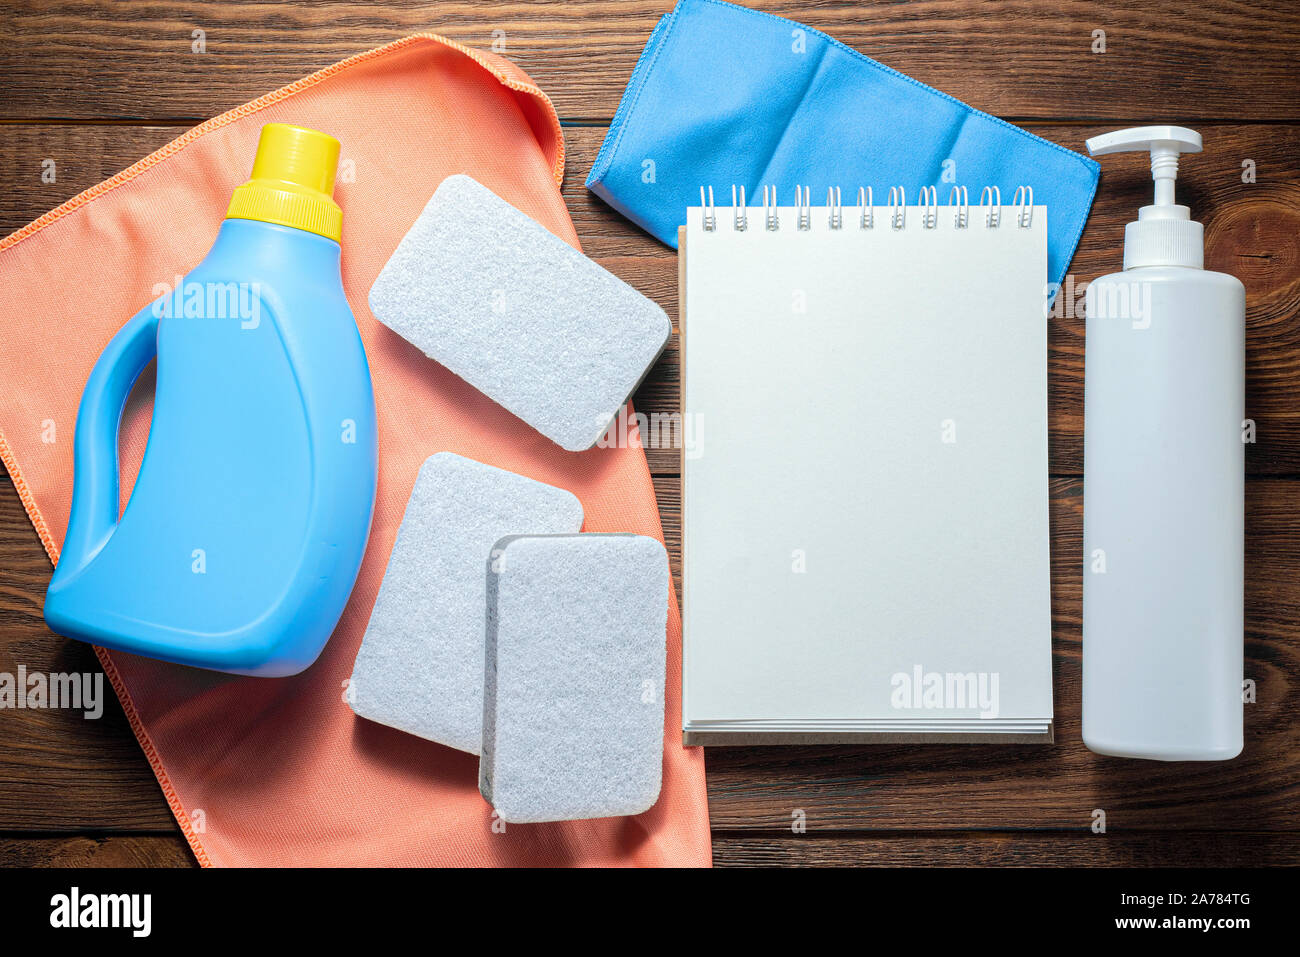 Washing supply, softener, detergent, dish cloth and blank page notepad on wooden table. Household tips mock up. Stock Photo